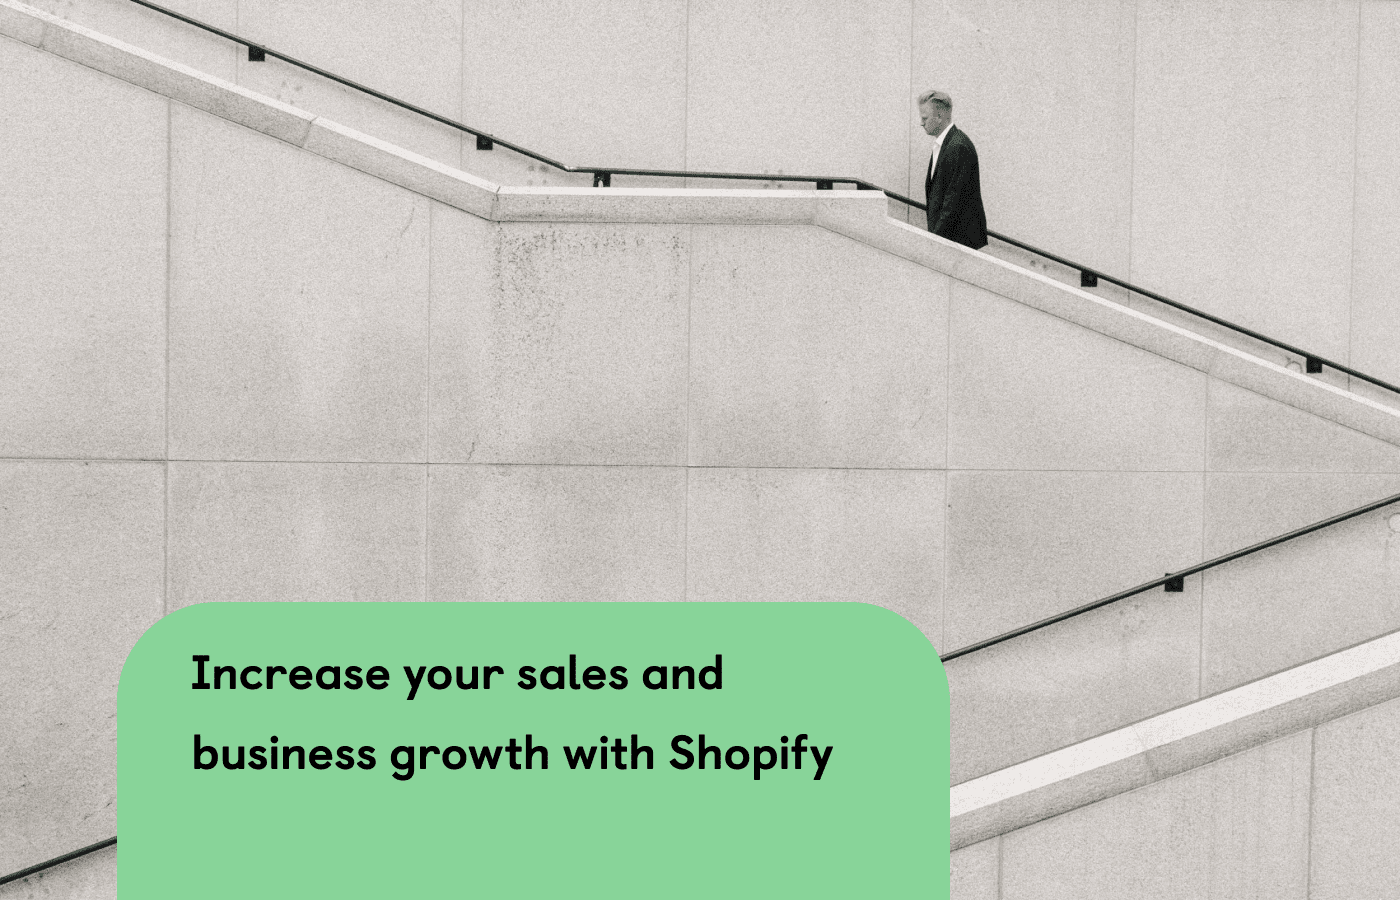 Tips: Increase your sales and business growth with Shopify